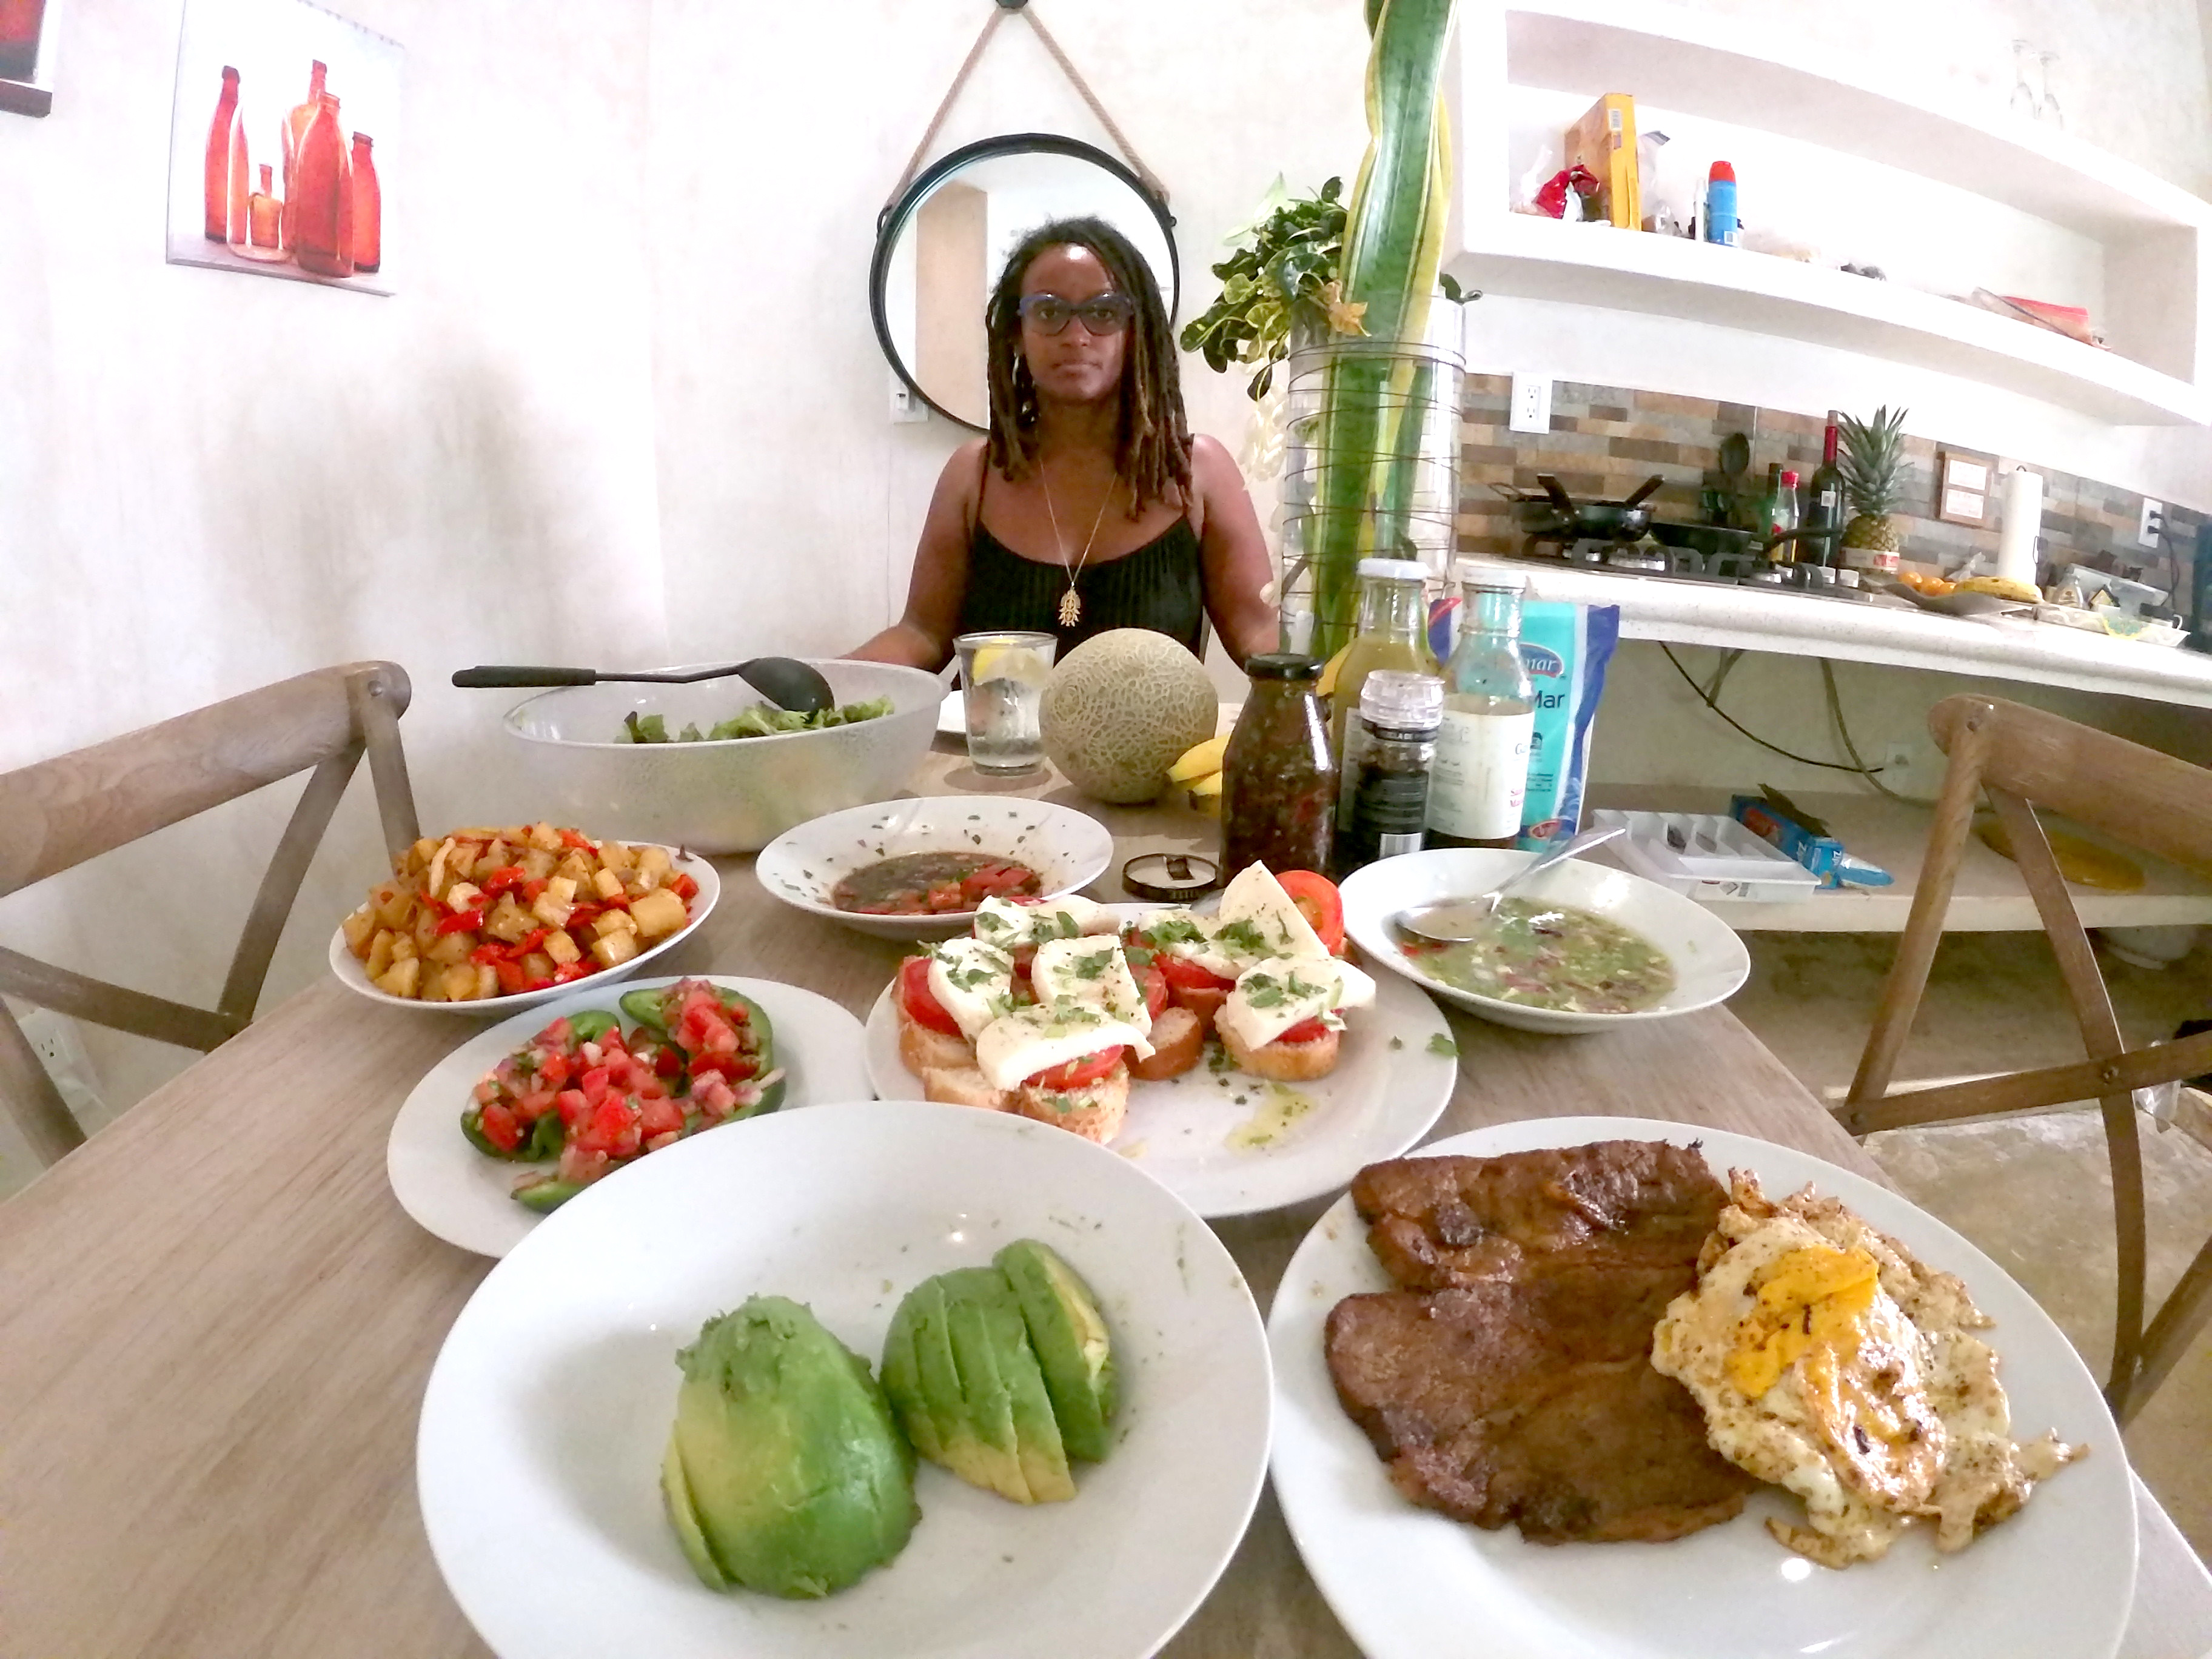 A medium-dark skinned adult woman sits at the end of a table, as if sitting across from the viewer. She has shoulder-length, dreadlocked hair, and wears glasses and a black tank top with a gold necklace. The table is set with colorful foods like avocados and bruschetta.